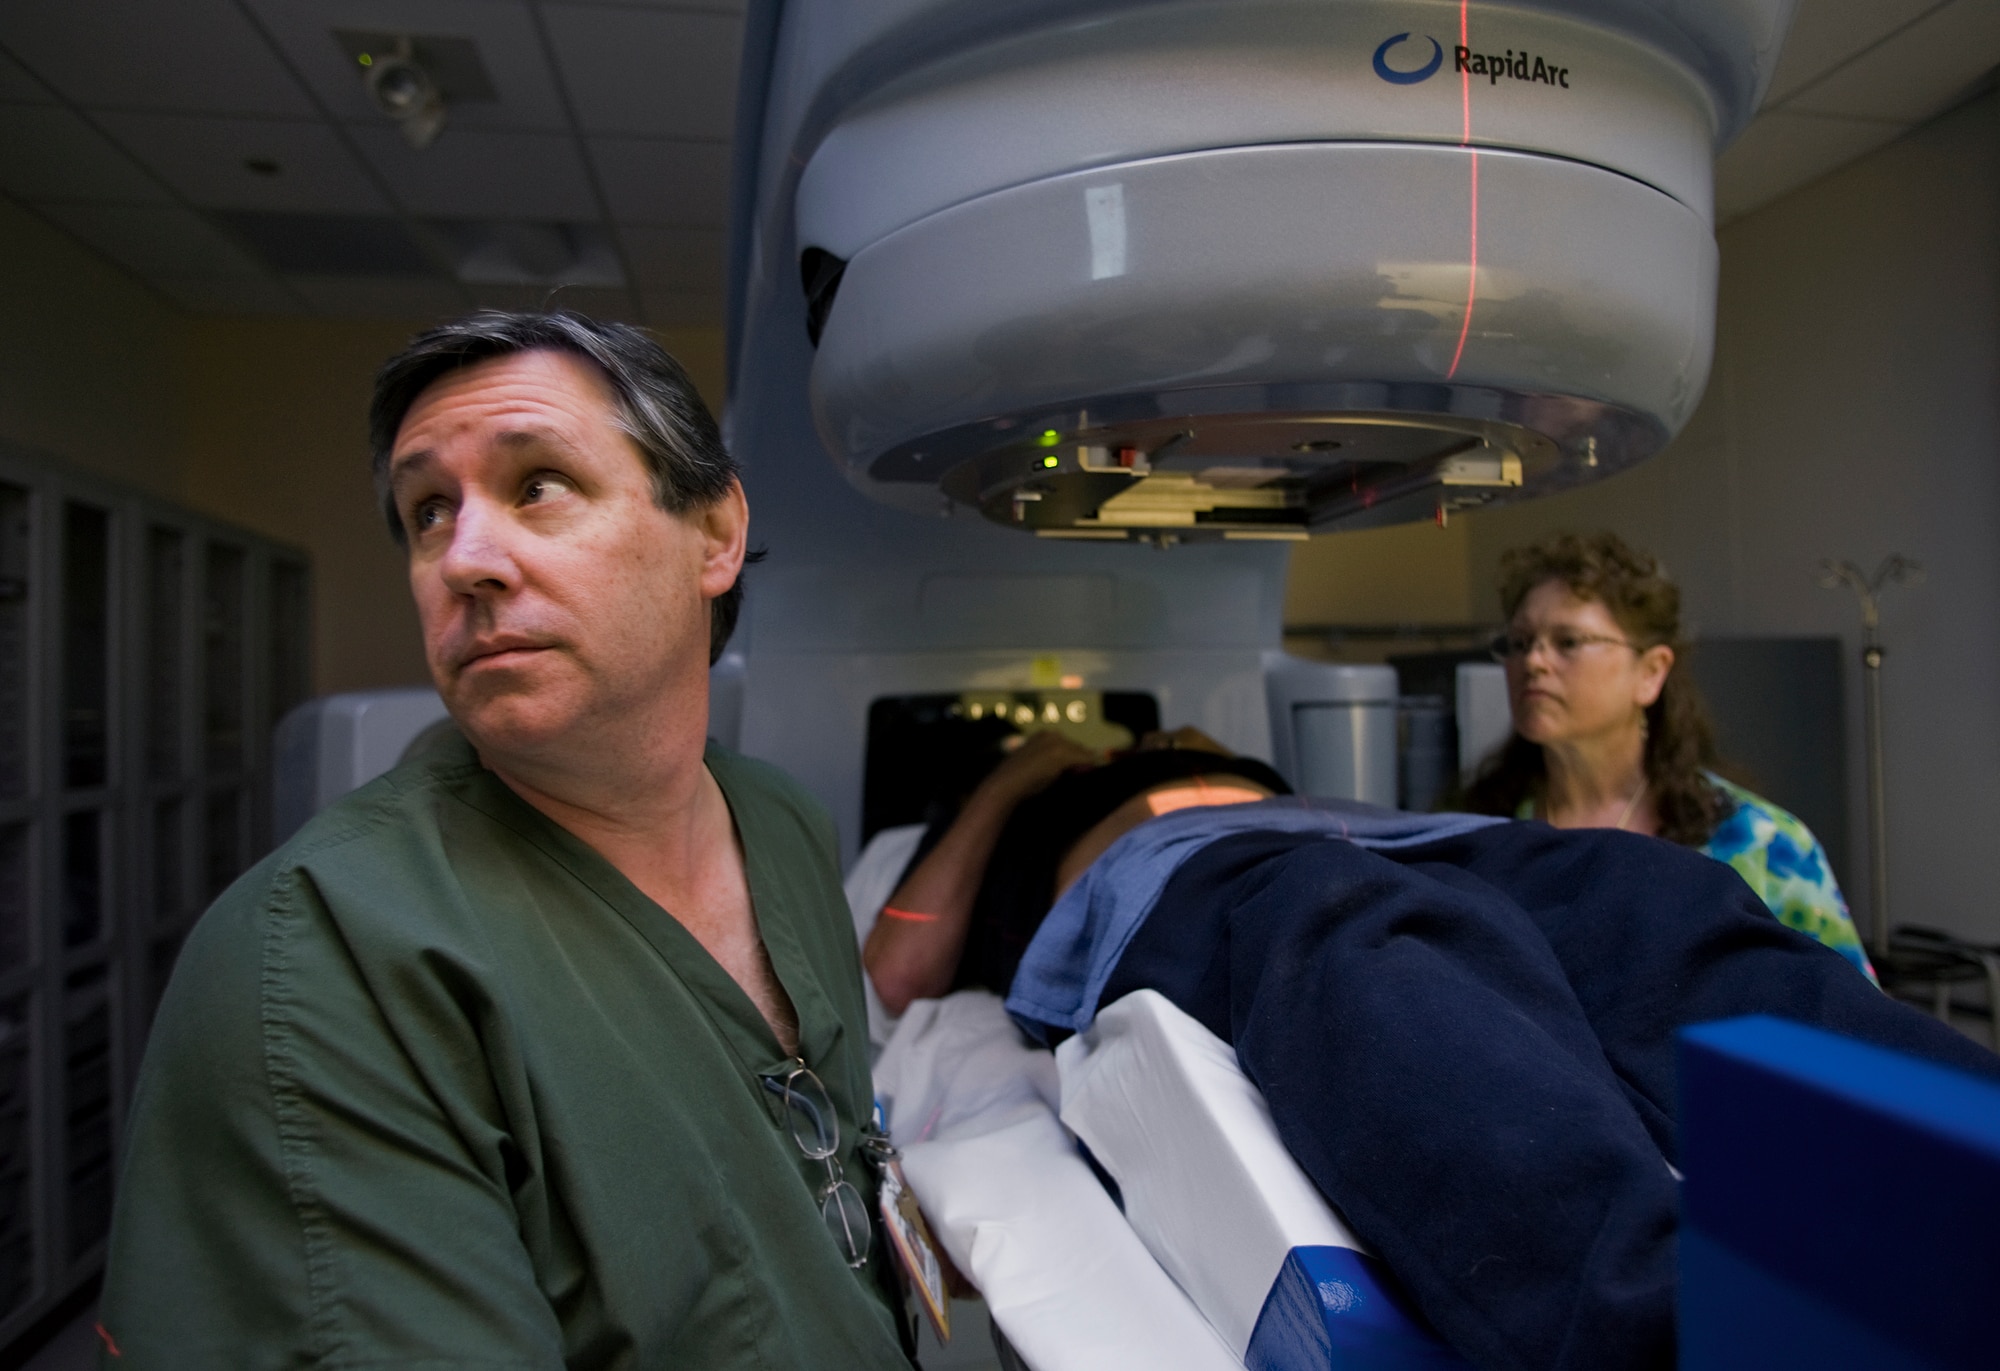 Donavon Park and Julie Wagness target a patient's prostate cancer for radiation treatment using a newly-upgraded, $5.7 million linear accelerator Oct. 13, 2010, at the David Grand USAF Medical Center at Travis Air Force Base, Calif. This treatment targets the cancer with pinpoint precision and accuracy. Mr. Park and Ms. Wagness are radiation therapists with the Department of Veterans Affairs at the Joint Radiation Oncology Center. (U.S. Air Force photo/Tech. Sgt. Bennie J. Davis III)